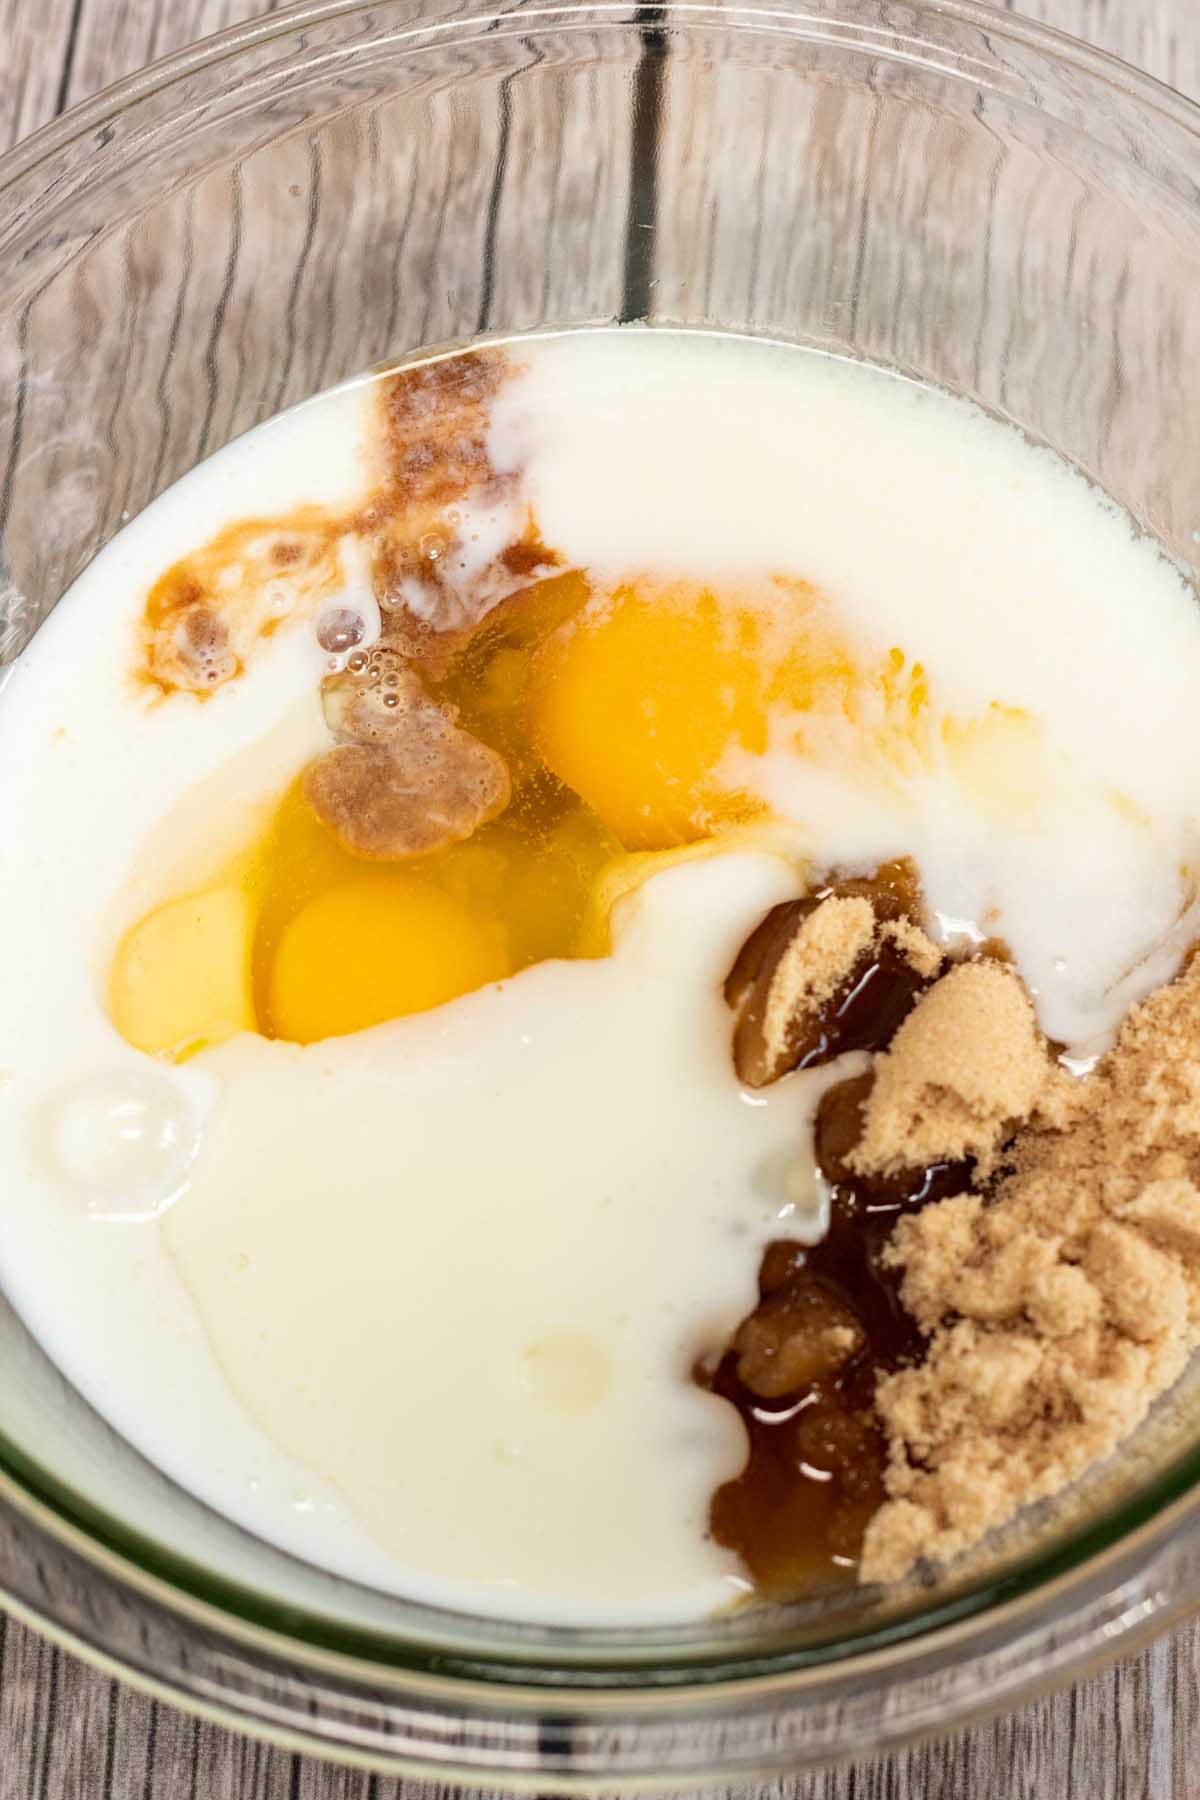 Buttermilk, vegetable oil, eggs, vanilla and brown sugar in a mixing bowl.